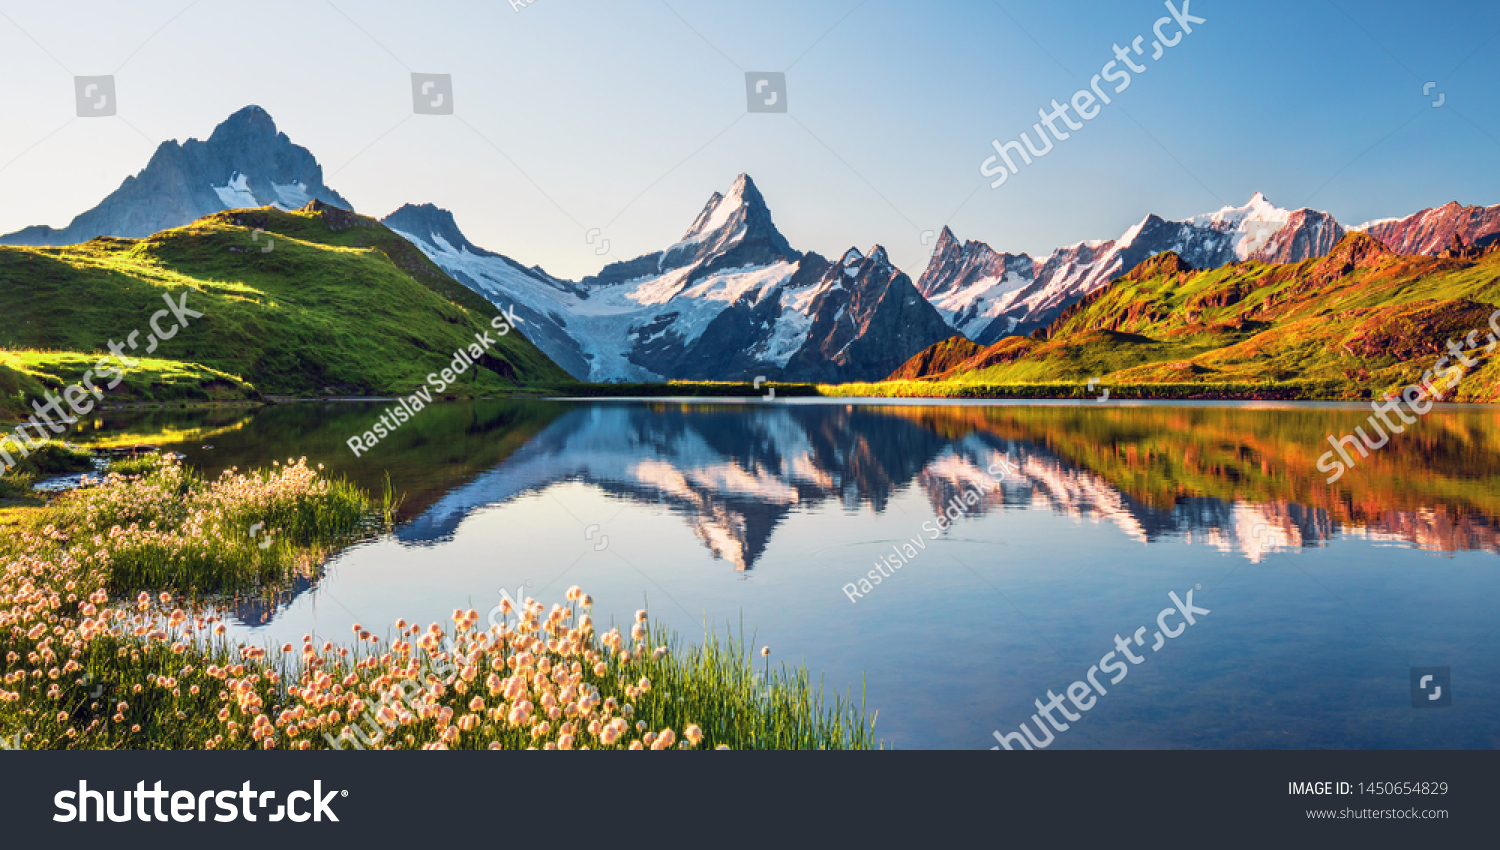 Sunrise view on Bernese range above Bachalpsee lake. Highest peaks Eiger, Jungfrau and Faulhorn in famous location. Switzerland alps, Grindelwald valley #1450654829